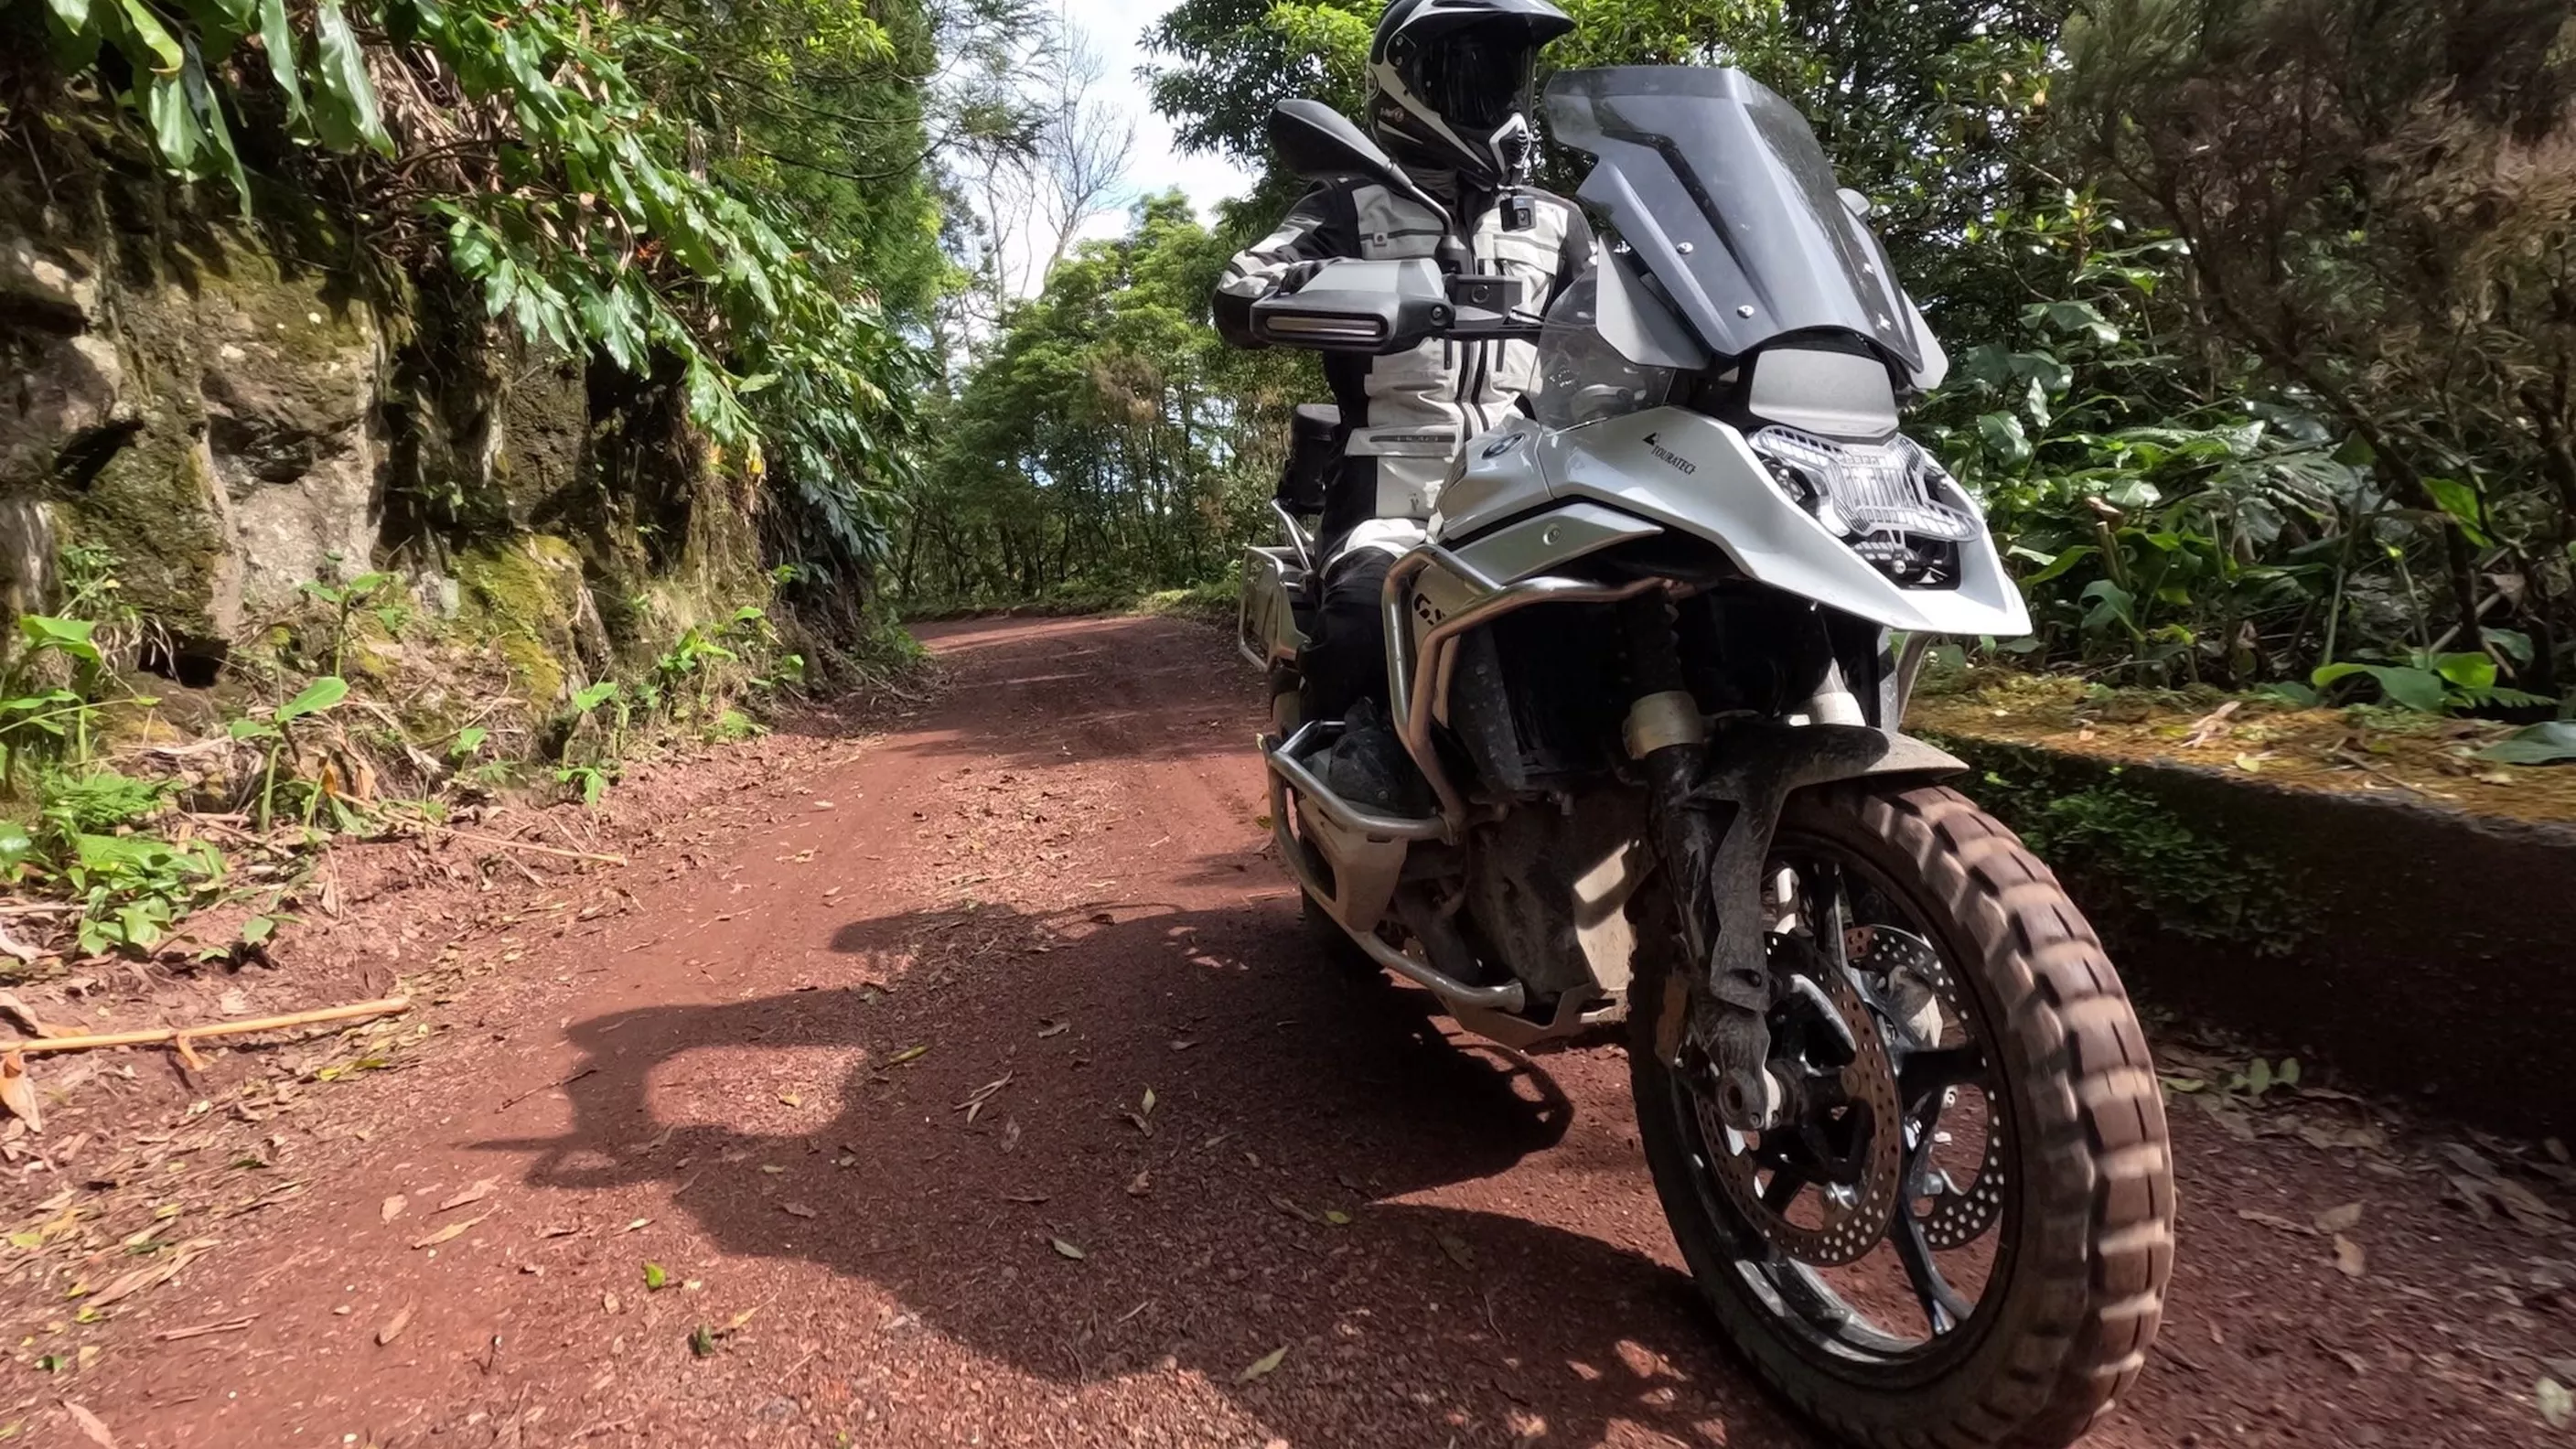 BMW R 1300 GS test and experience